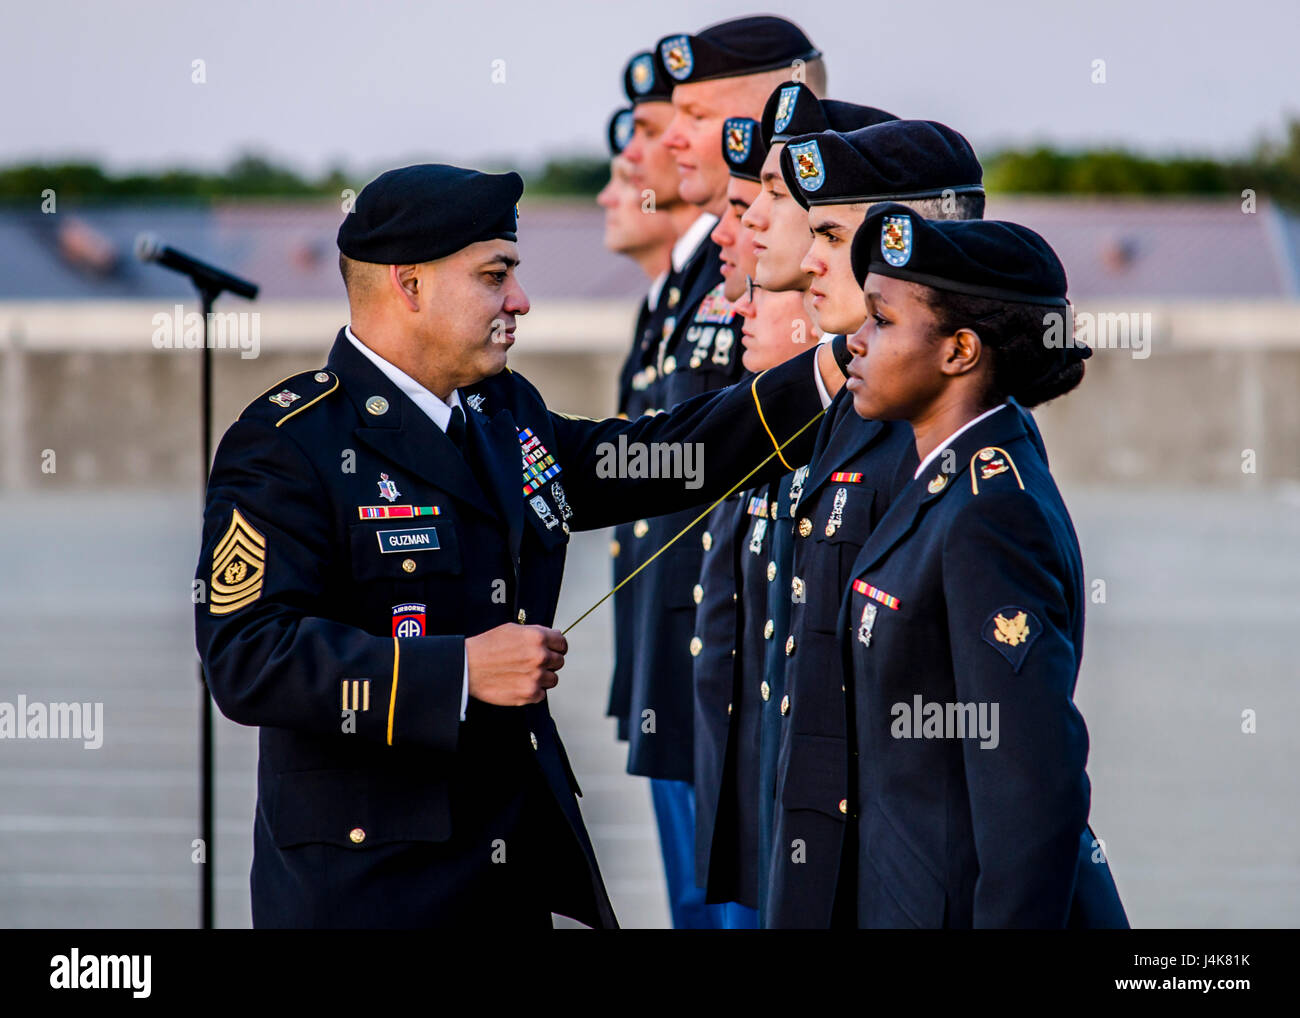 (FORT BELVOIR, Va. (May 04, 2017)--Hundreds of service members at Fort Belvoir Community Hospital gathered before daybreak and celebrated their unique service cultures and bonds as one of the only two joint military medical facilities in the U.S. during a spring formation and uniform transition ceremony May 4, 2017.     A naval tradition since 1817, the formation ceremony signifies the change from fall/winter to spring/summer attire. In a show of solidarity and camaraderie, the U.S. Army, Navy, Air Force and Public Health Service participated in the event as a show of support and to reaffirm t Stock Photo